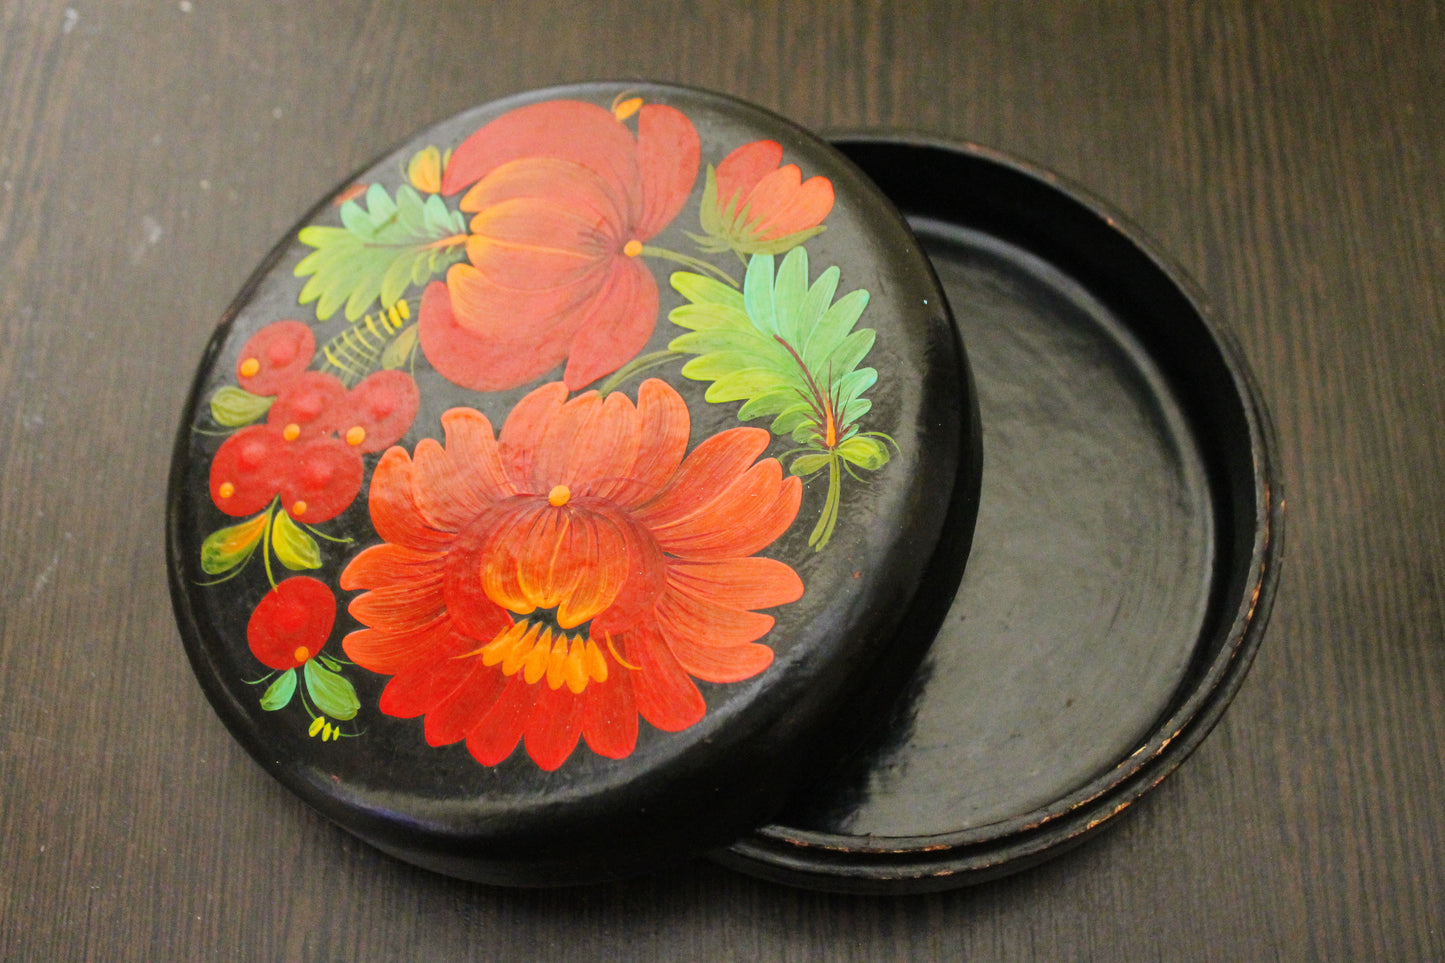 Vintage round  jewelry wooden box 5.7 inches - Petrykivka box - USSR vintage - vintage flower box - handpainted box